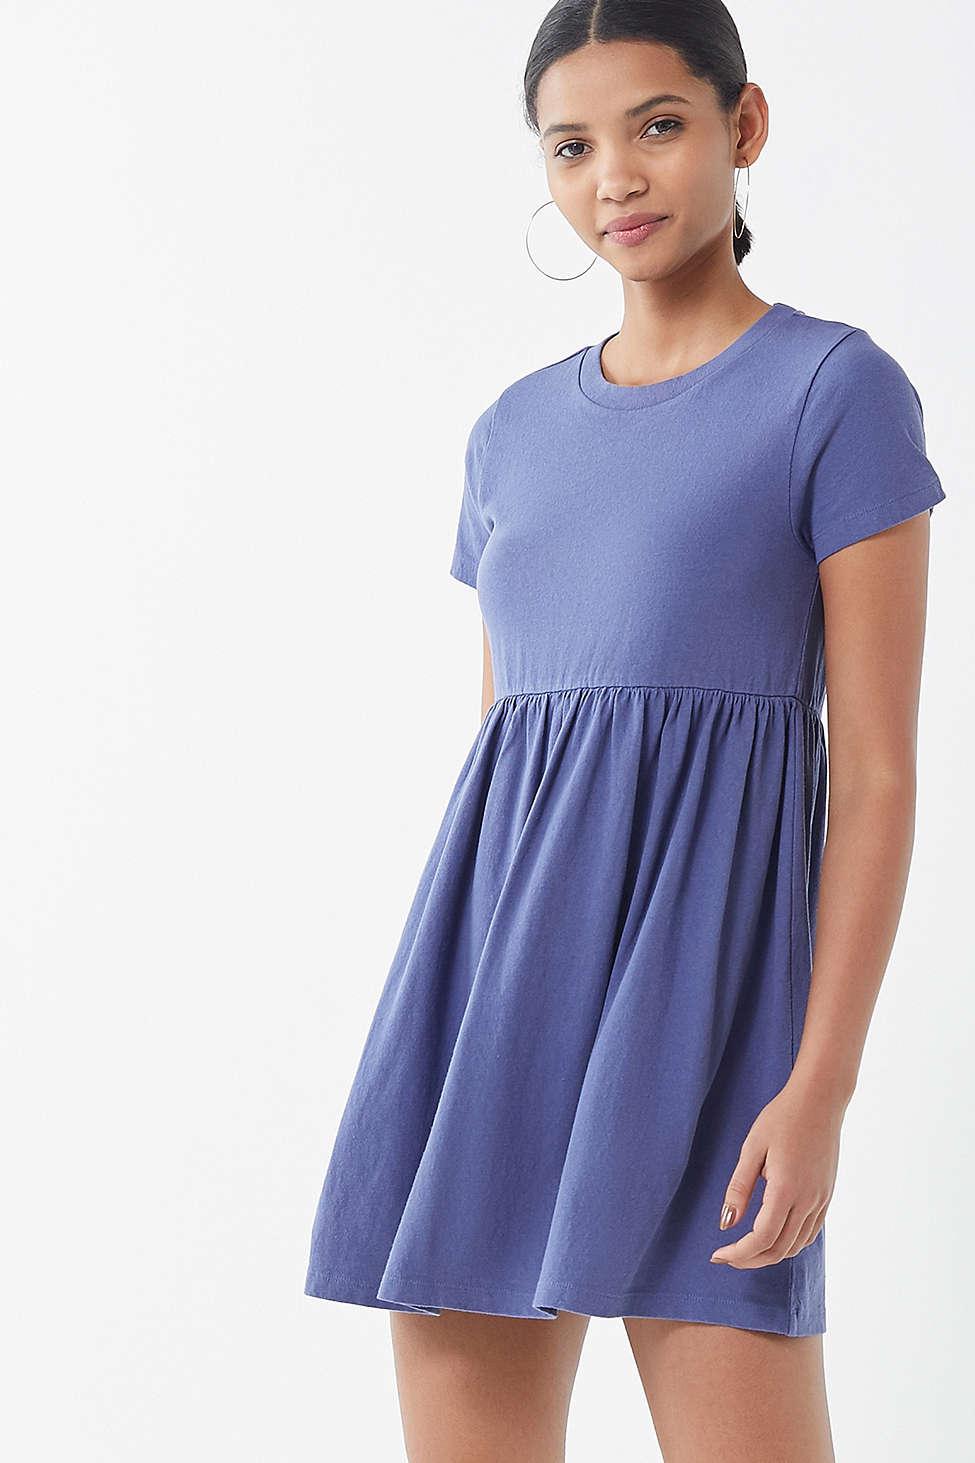 Urban Outfitters Uo Alexa Babydoll T Shirt Dress In Blue Lyst